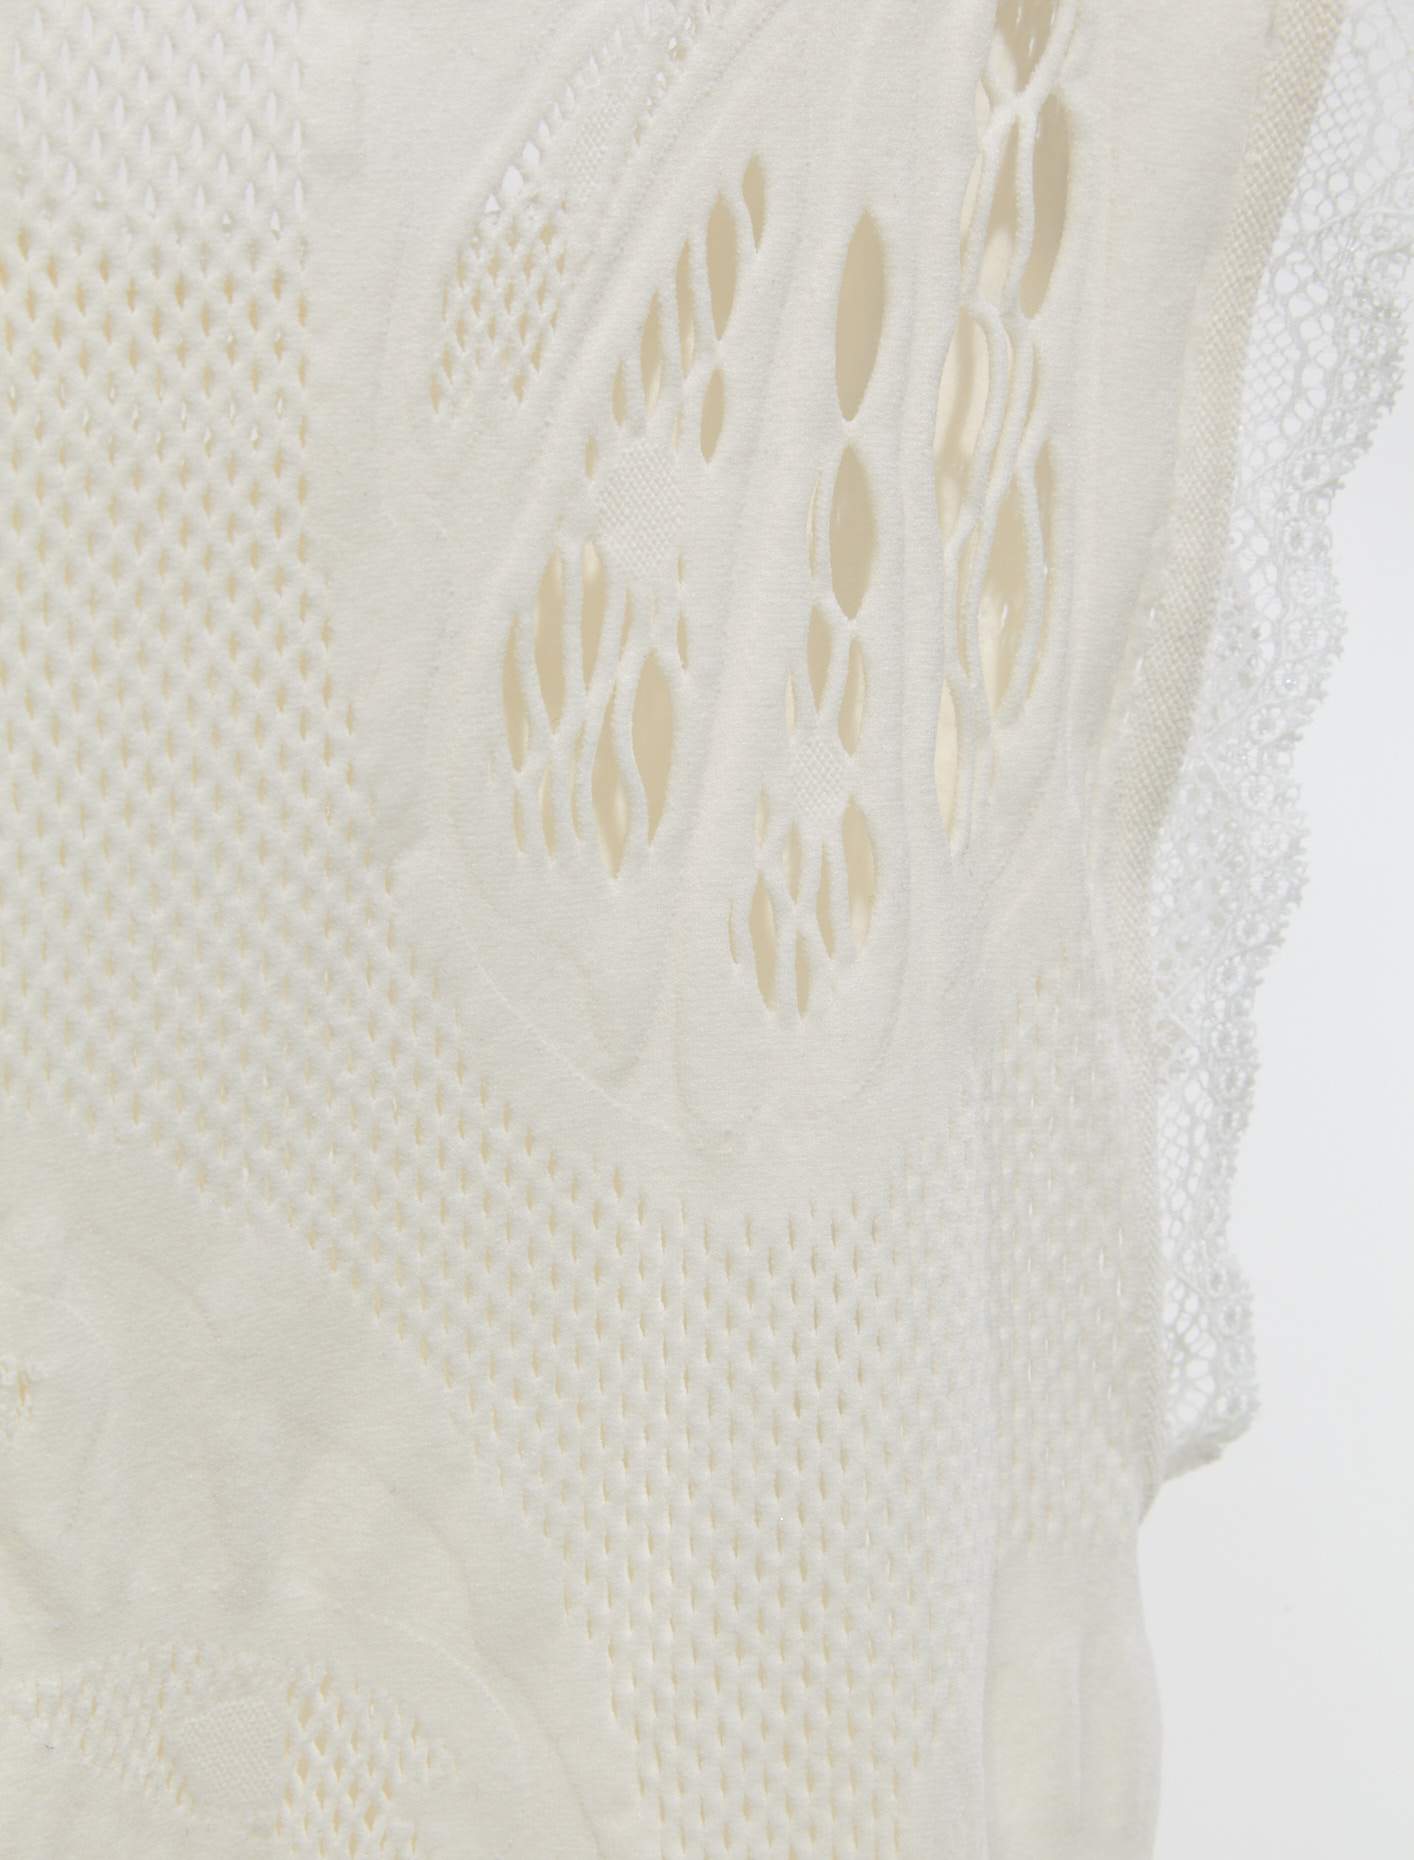 Knit Jacquard Top in Butter